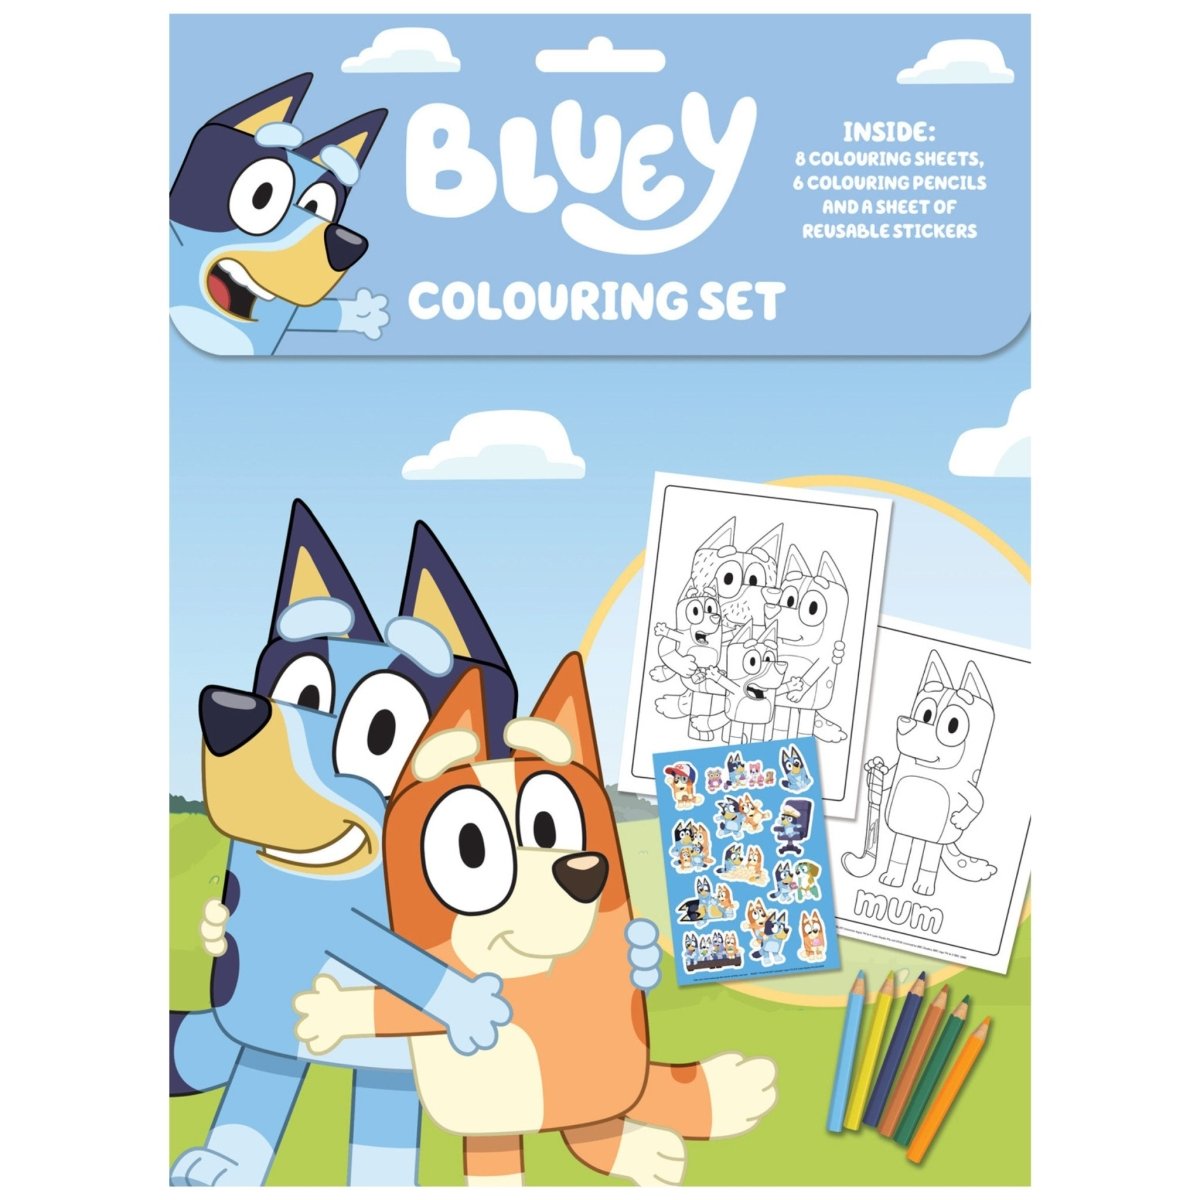 Bluey Colouring Set - Kids Party Craft